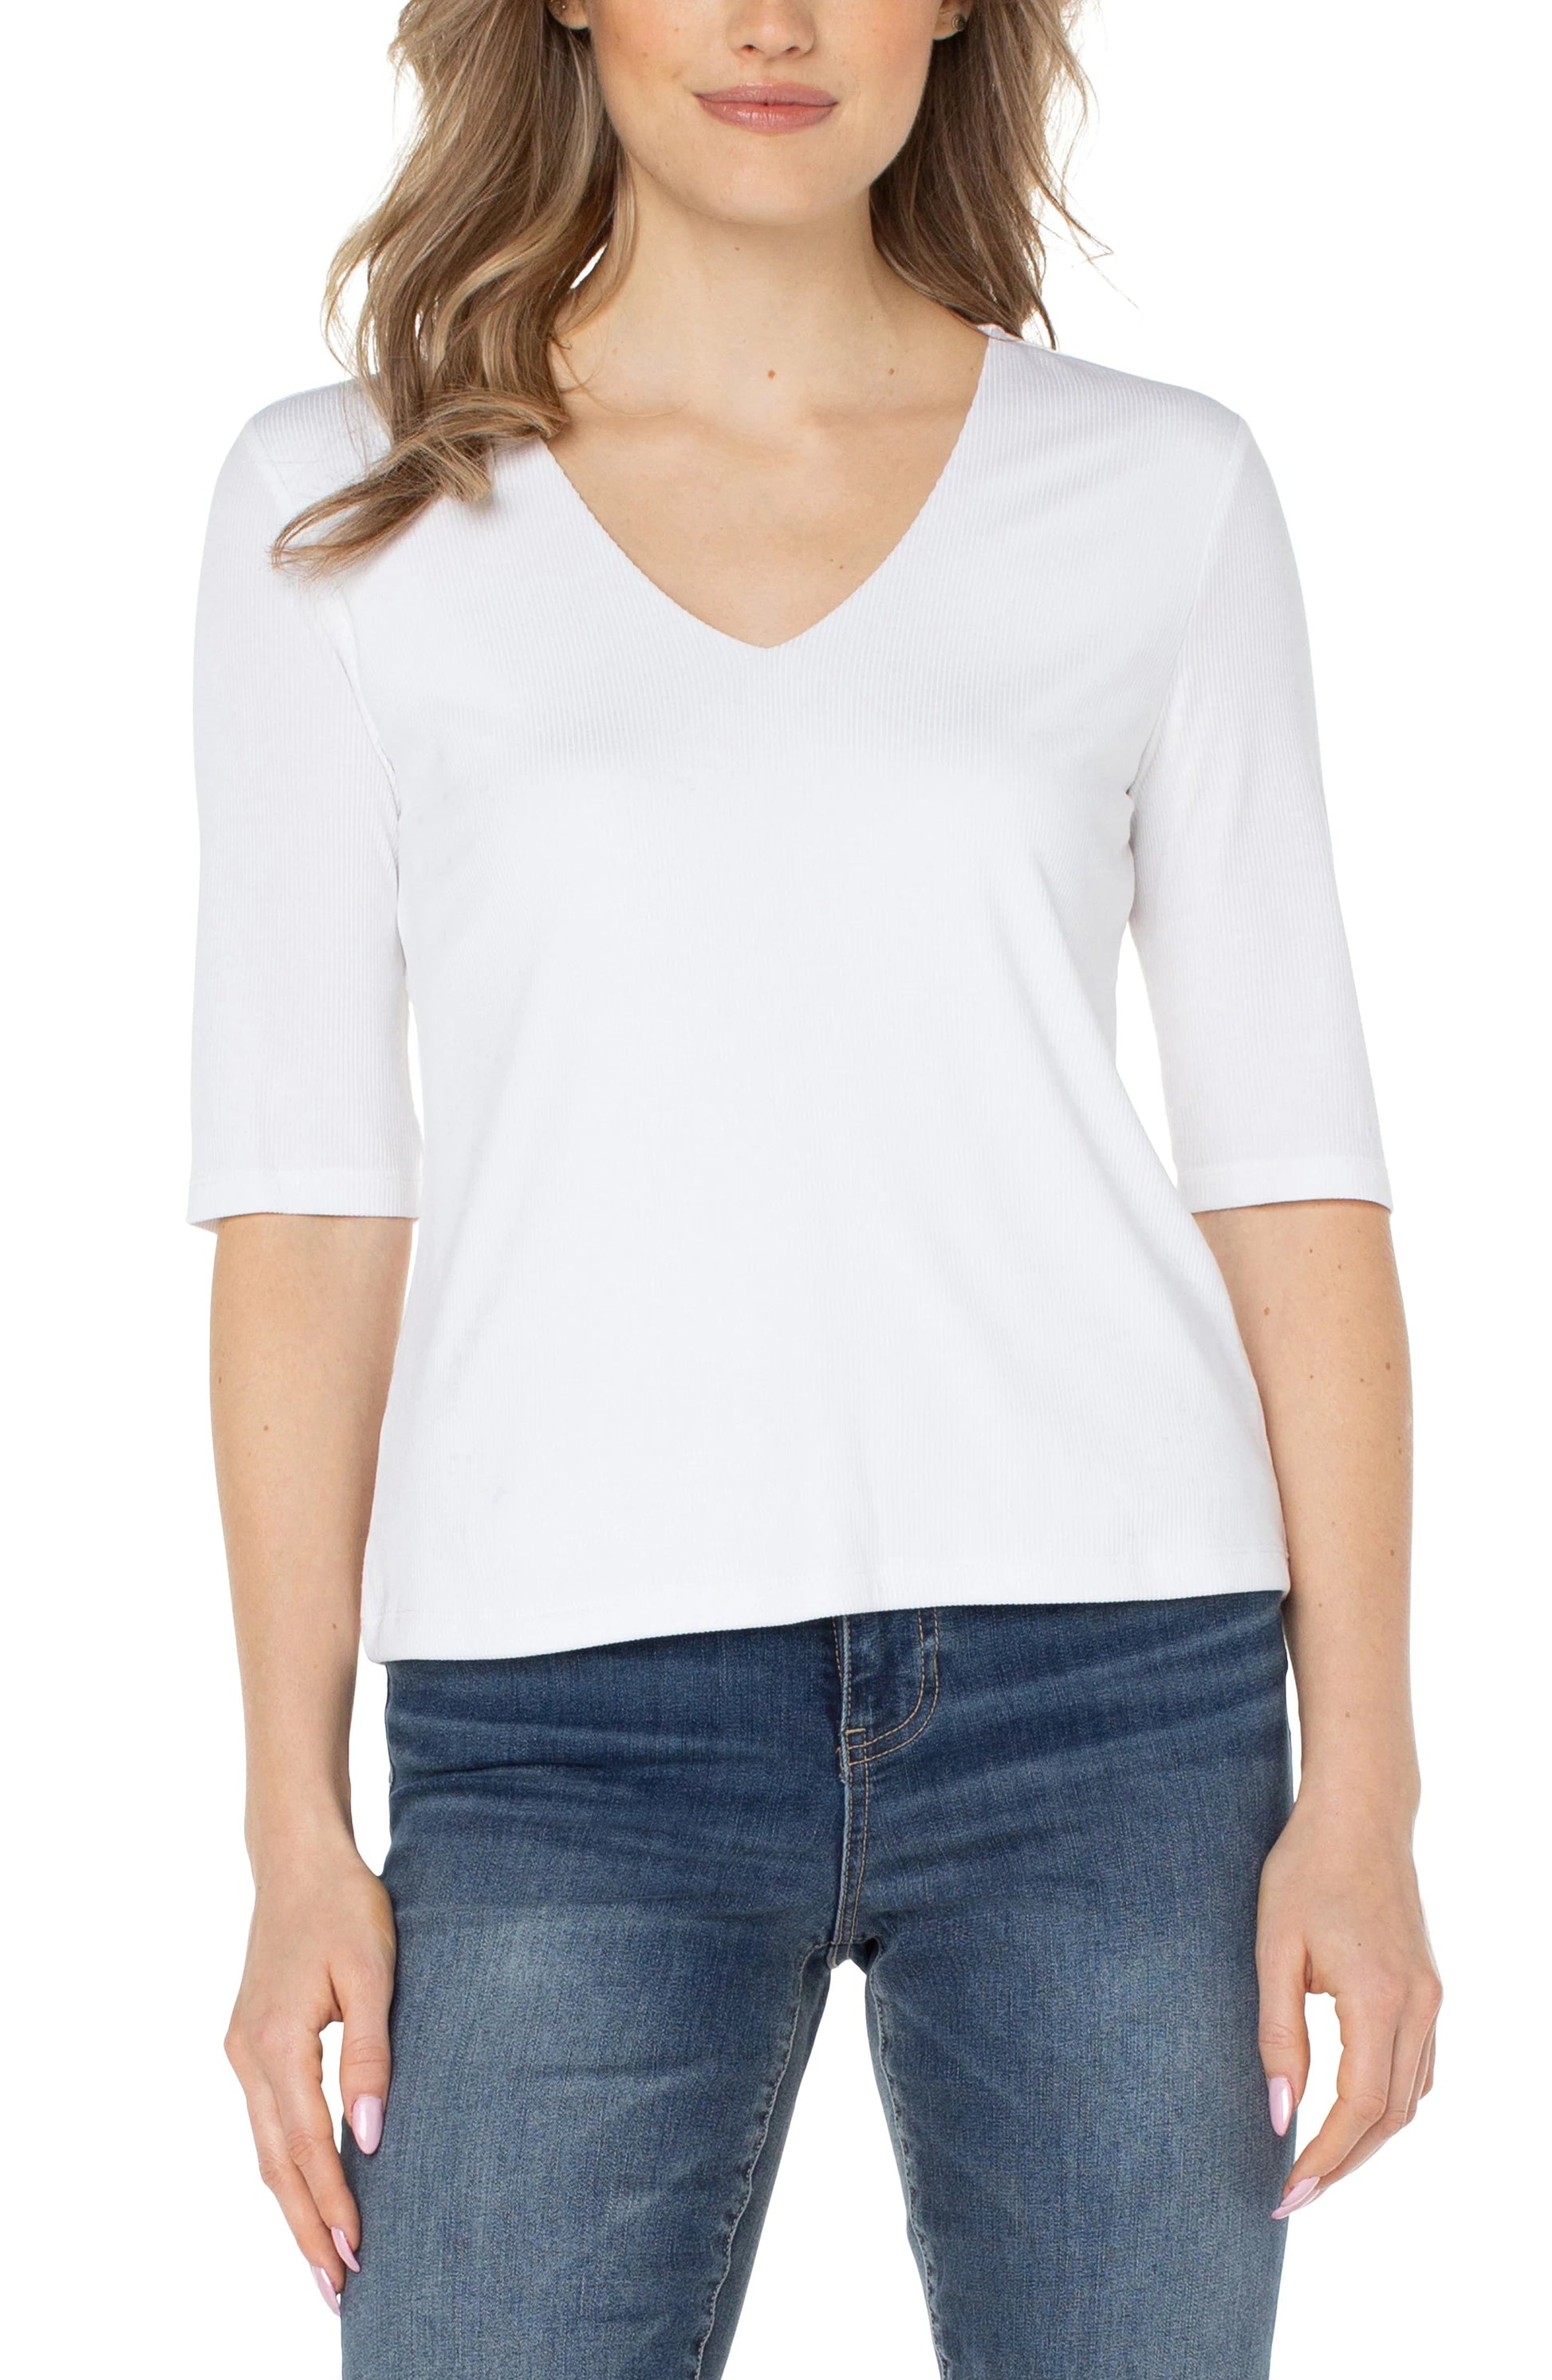 Liverpool Double Layer V-neck Rib Knit Top1/2 sleeve top